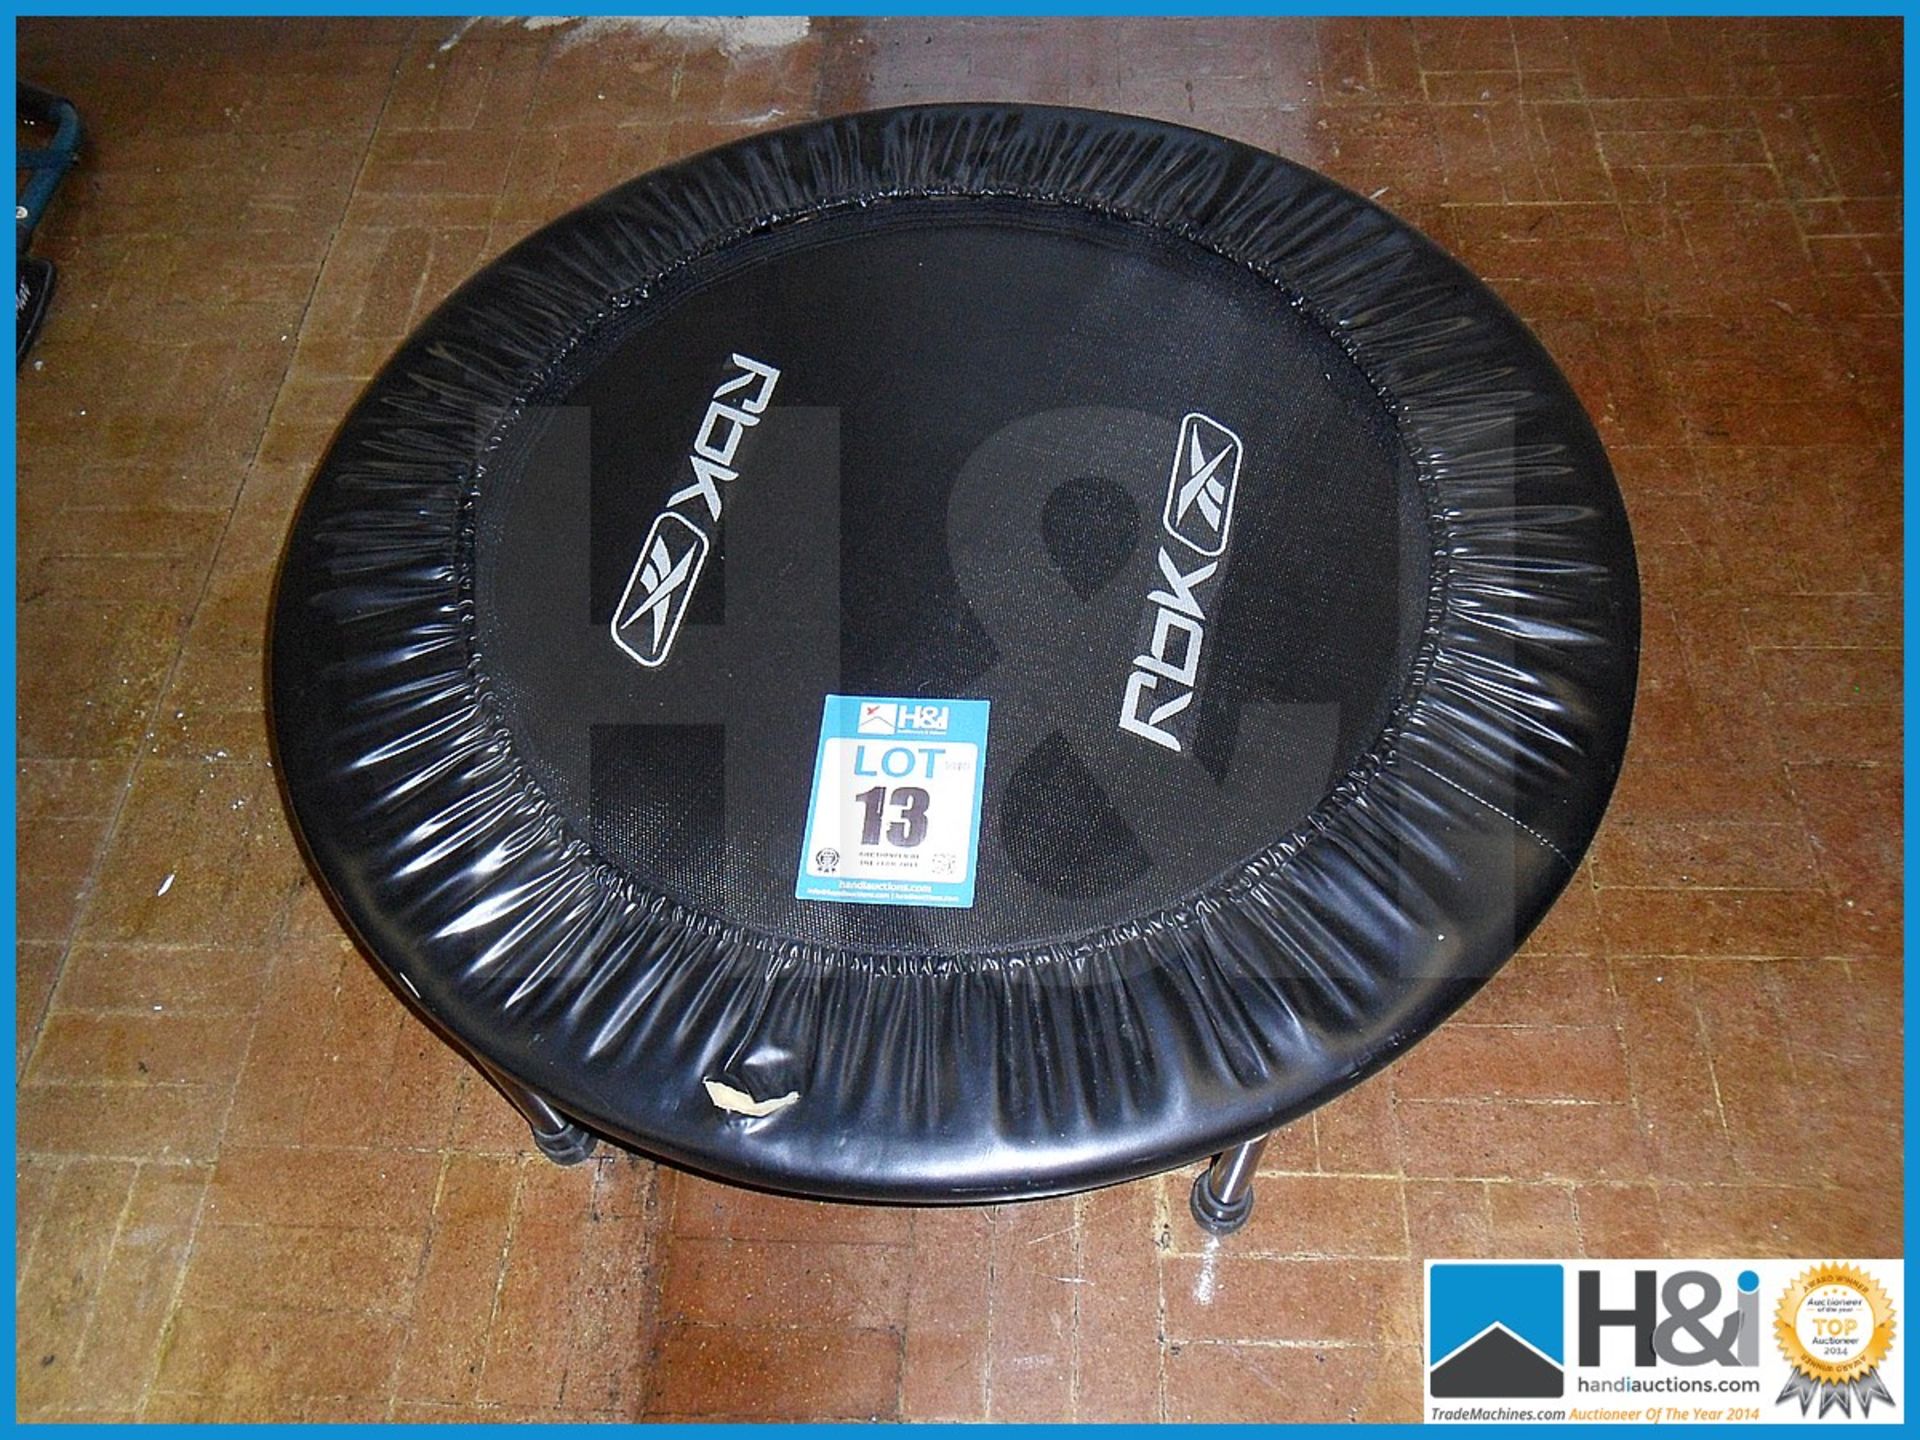 Rbk mini gym trampoline in excellent condition